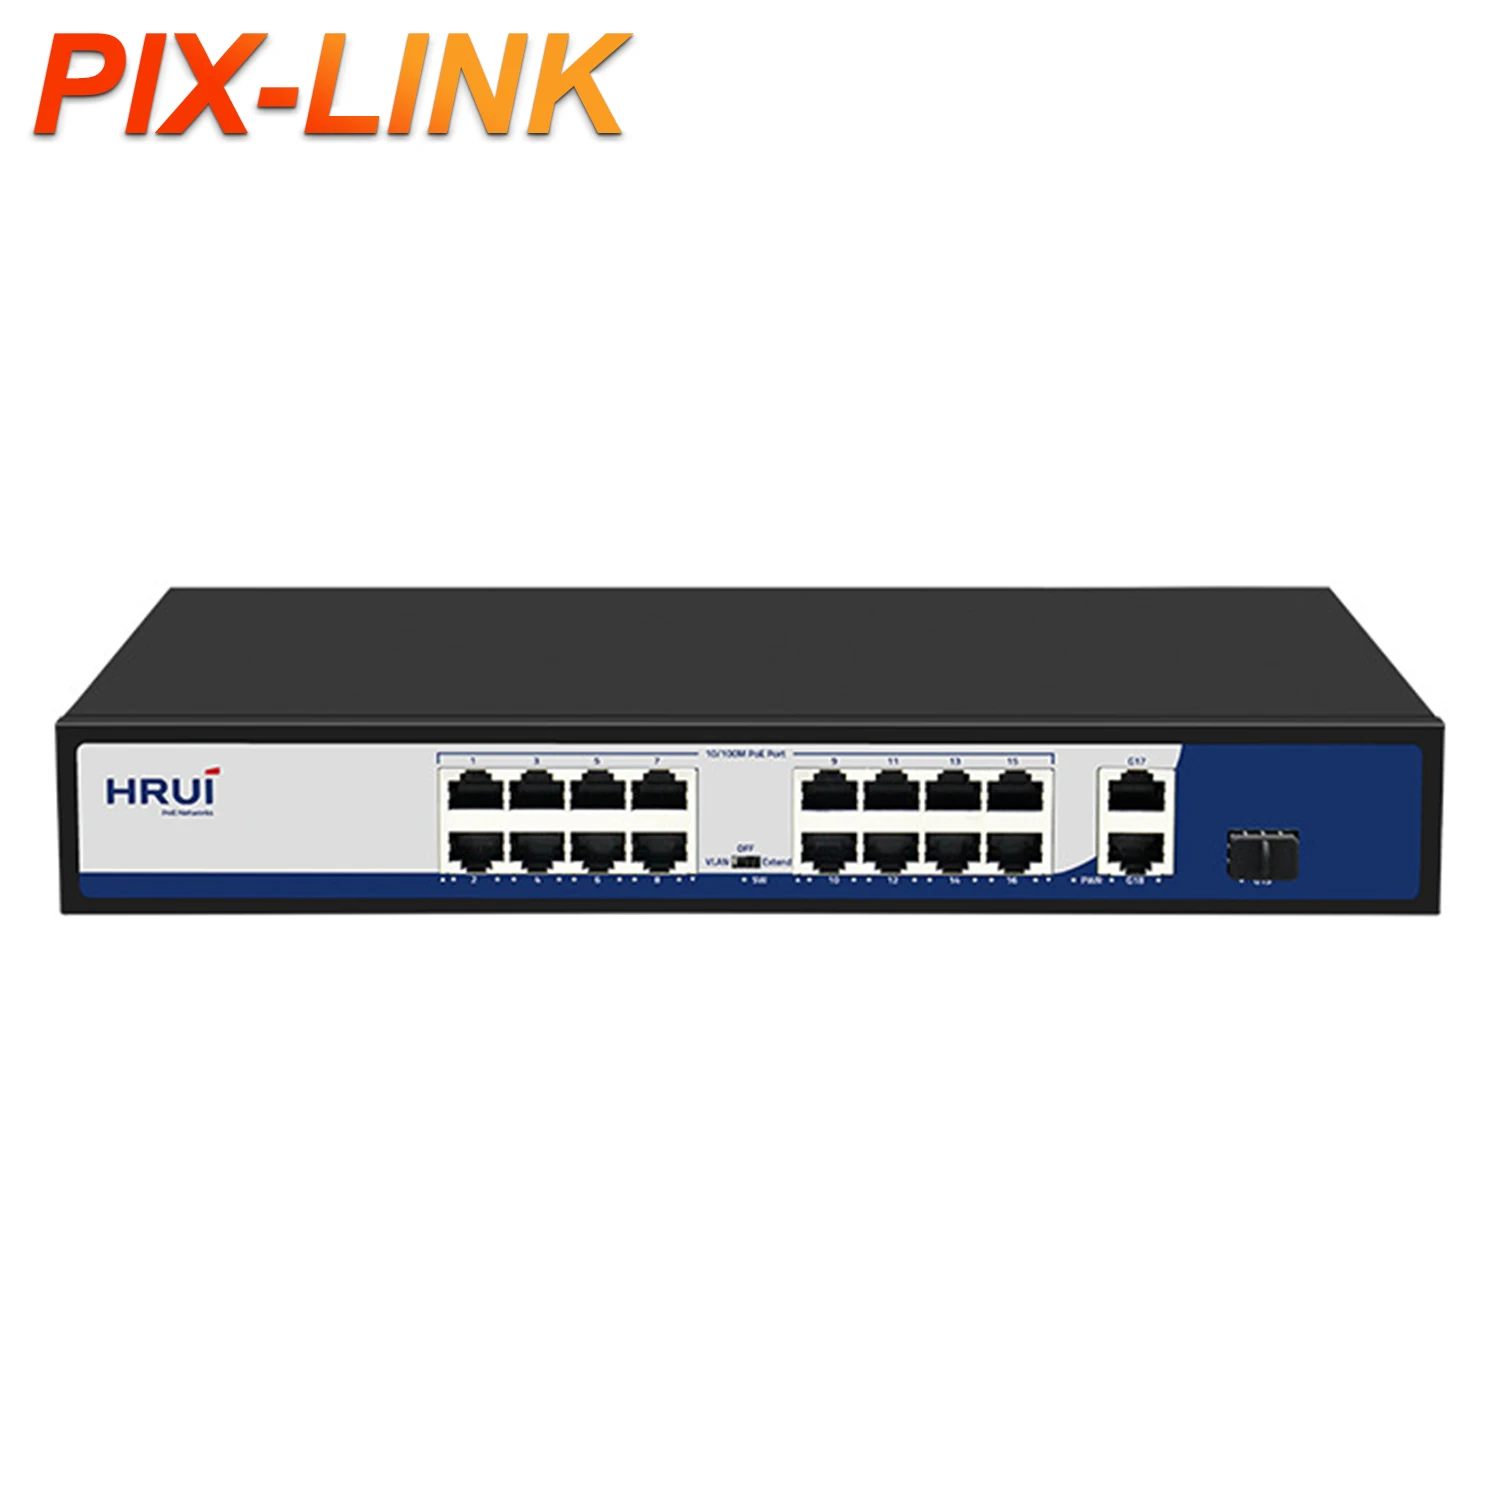 

16 Ports Gigabit PoE Switch 200W Support VLAN Extend 250 Meters PoE Switch for CCTV Network